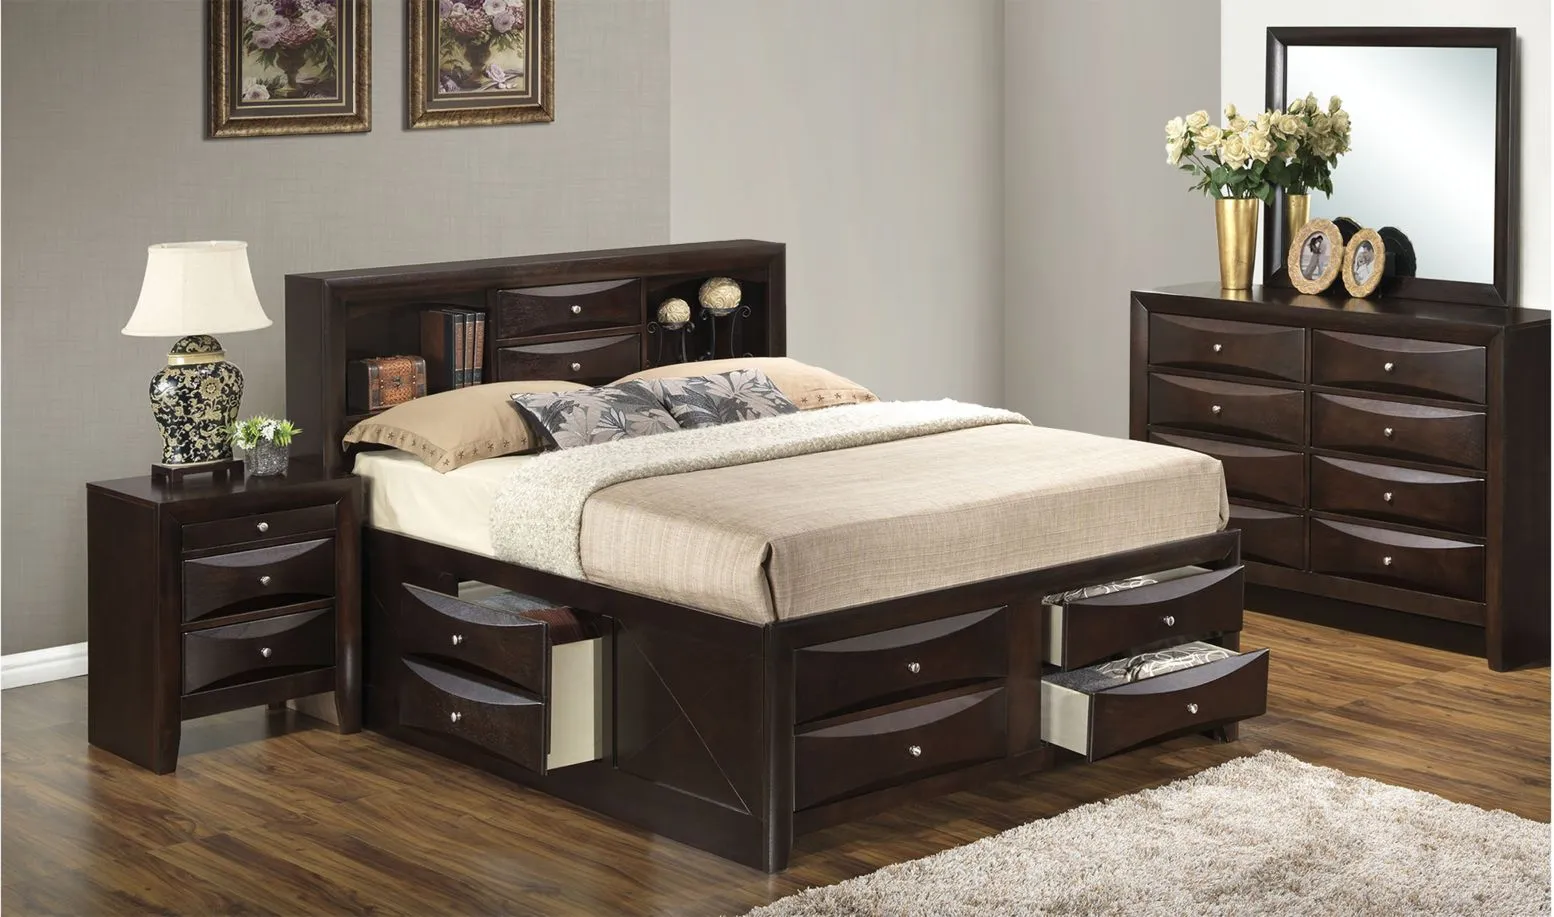 Marilla 4-piece Captain's Bedroom Set in Cappuccino by Glory Furniture